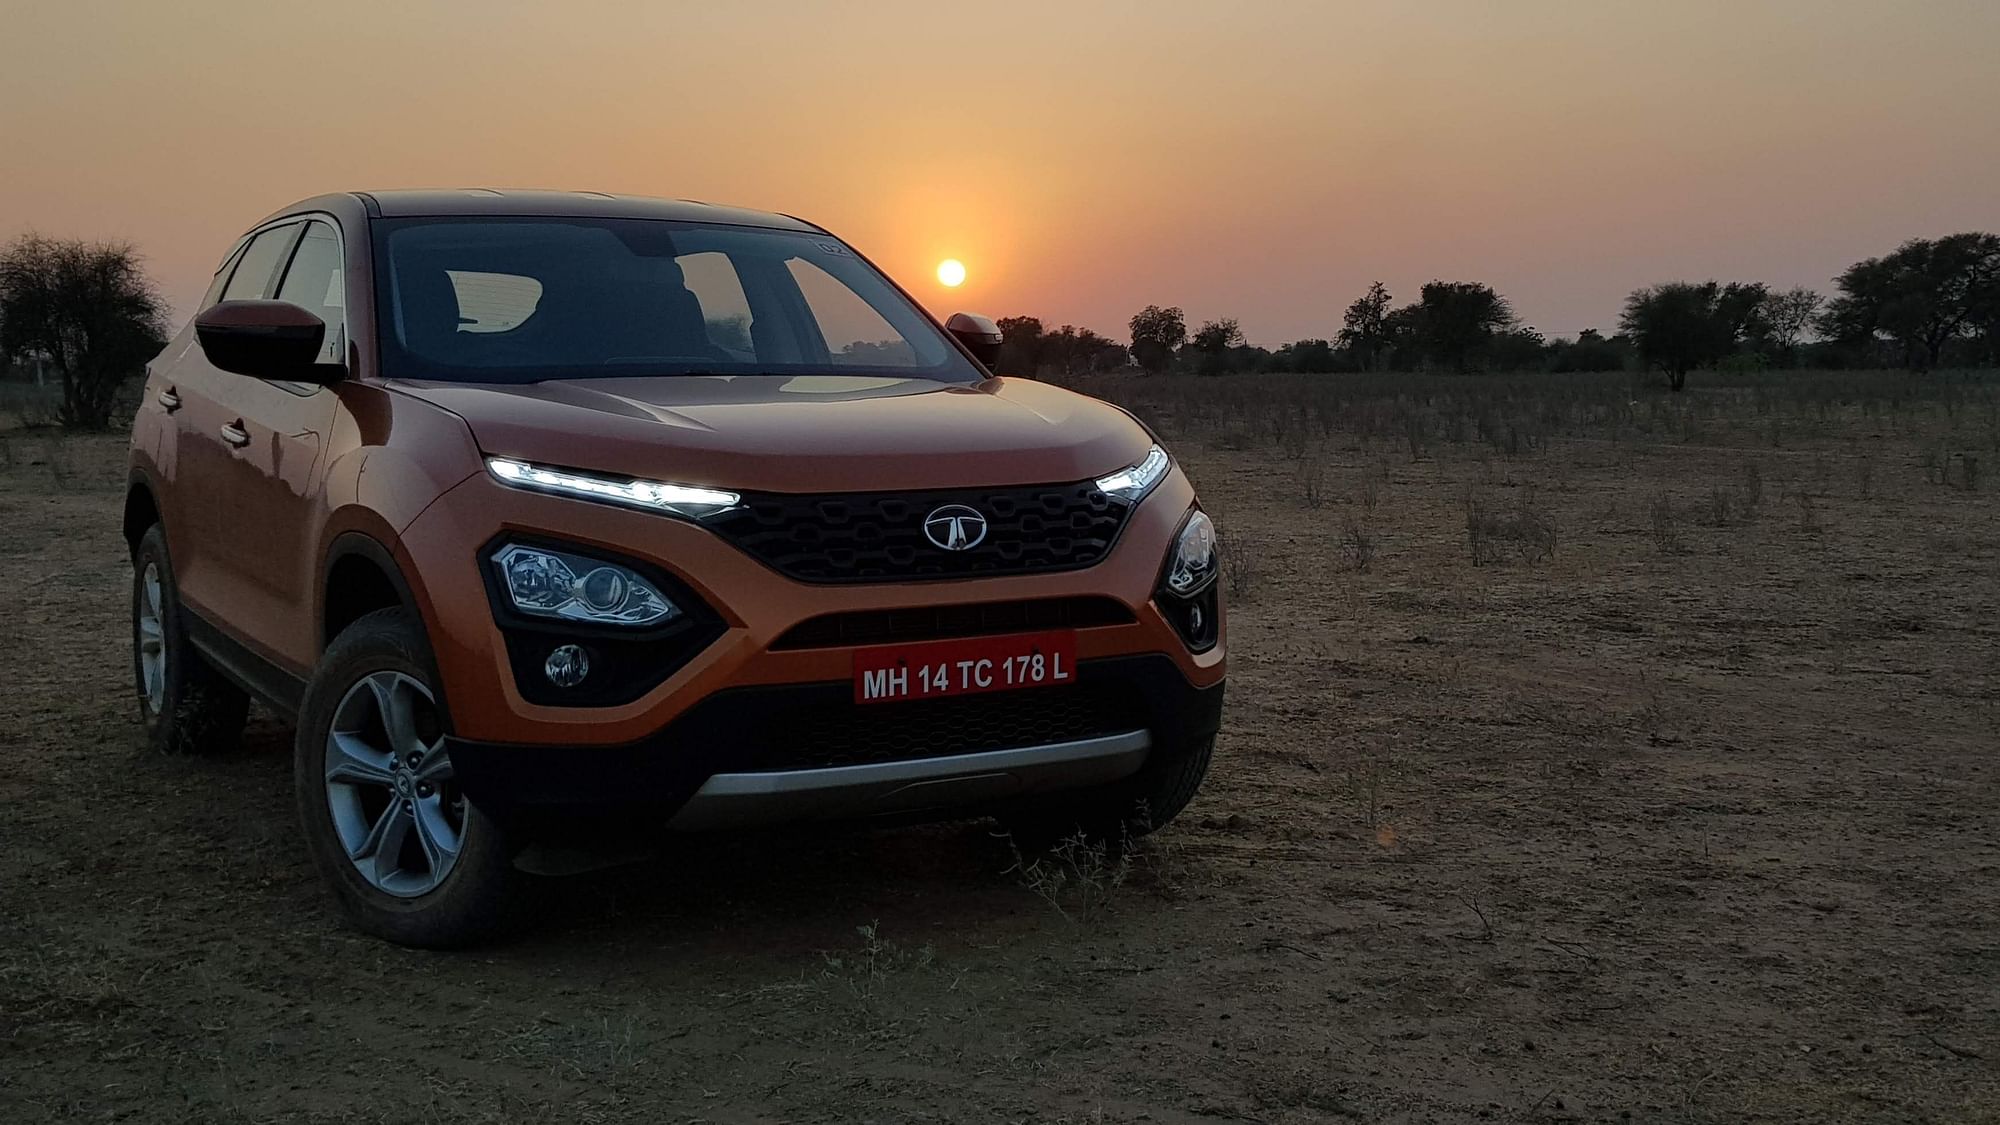 Bookings are open for the Tata Harrier, which will be launched in mid January 2019.